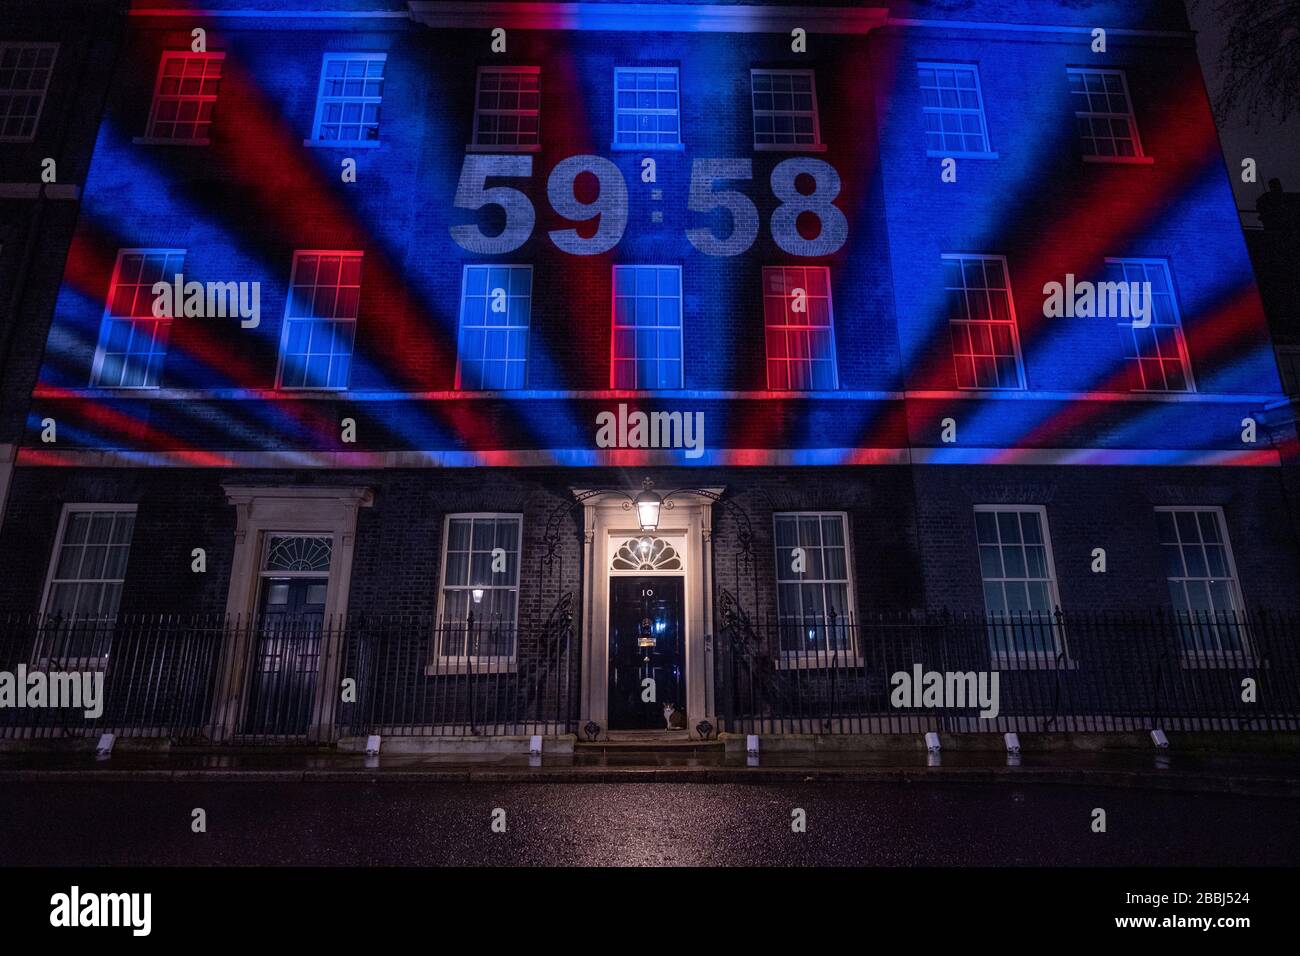 Brexit eve 31st of January 2020.  Pro Brexit supporters celebrate the final hours of being in the EU as the clock counts down to the United Kingdom leaving the European Union.  Pictured, the exterior of No 10 Downing St is lite up with a count down clock and light show.          by Gavin Crilly Photography, NO SALES, NO SYNDICATION contact for more information mob: 07810638169 web: www.pressphotographergloucestershire.co.uk email: gavincrilly@gmail.com    The photographic copyright (© 2015) is exclusively retained by the works creator at all times and sales, syndication or offering the work fo Stock Photo